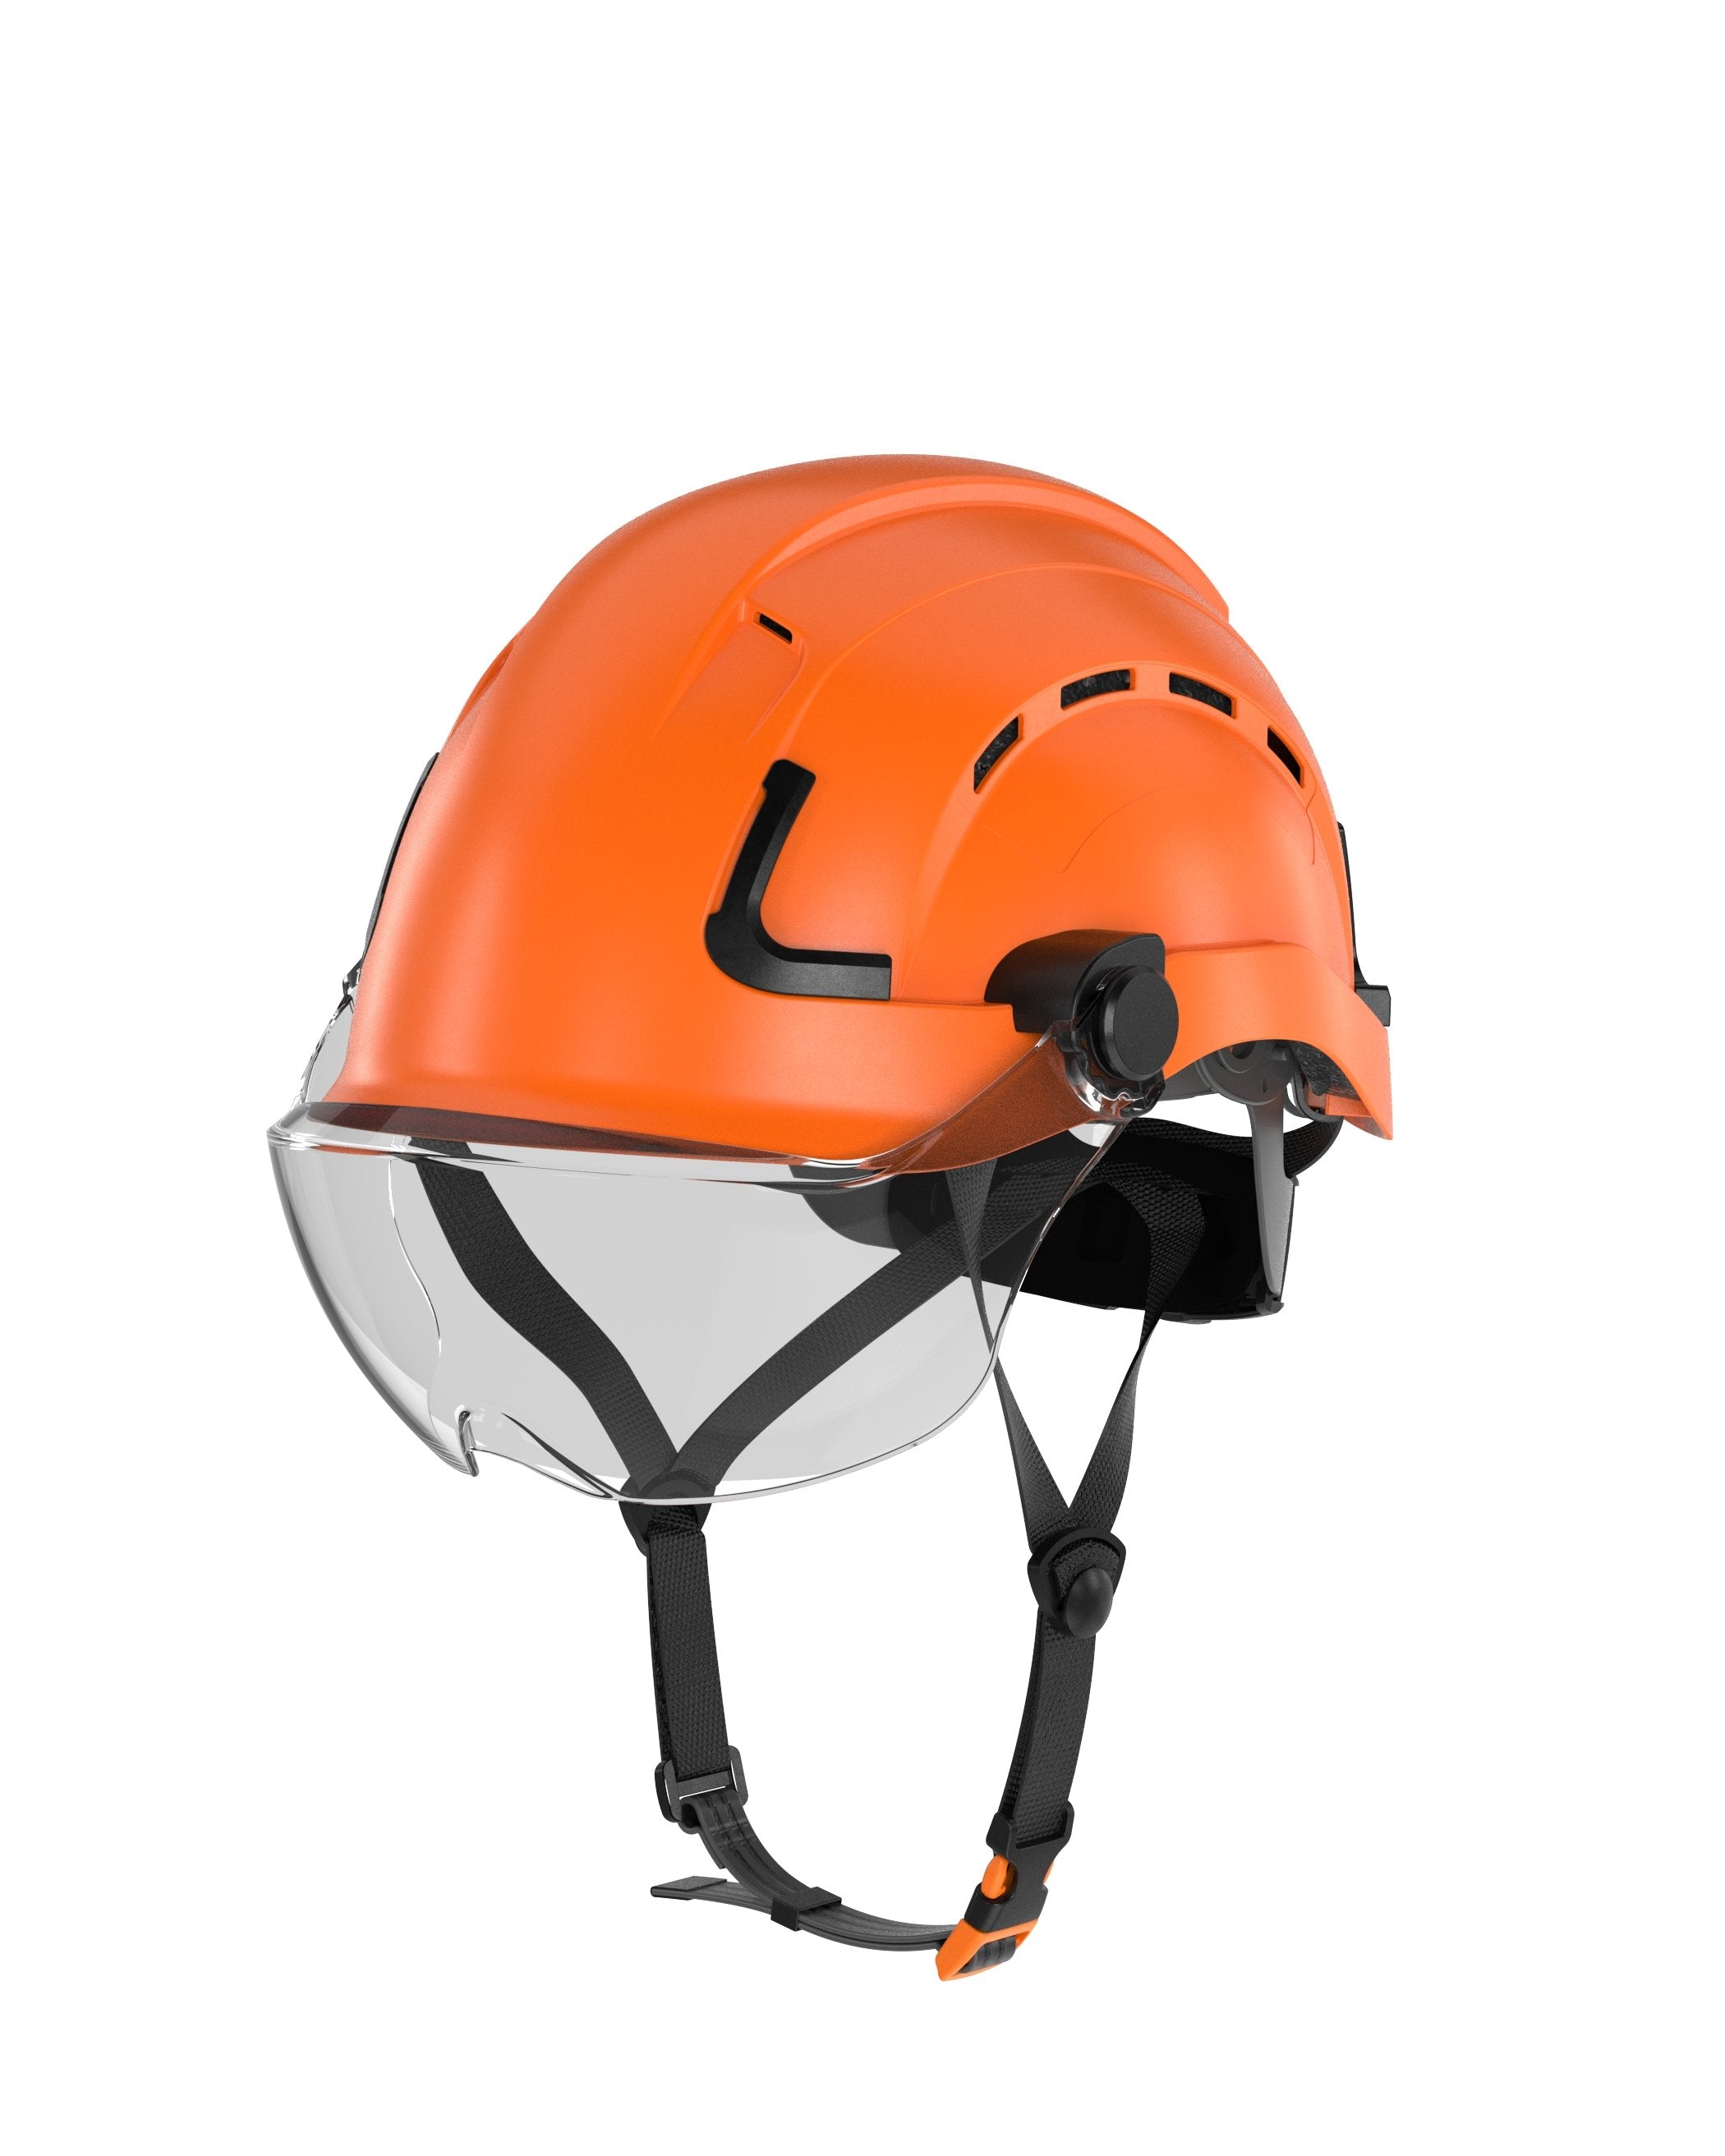 H2-CH Safety Helmet w/ clear visor Type 2 Class C, ANSI Z89 and EN12492  rated